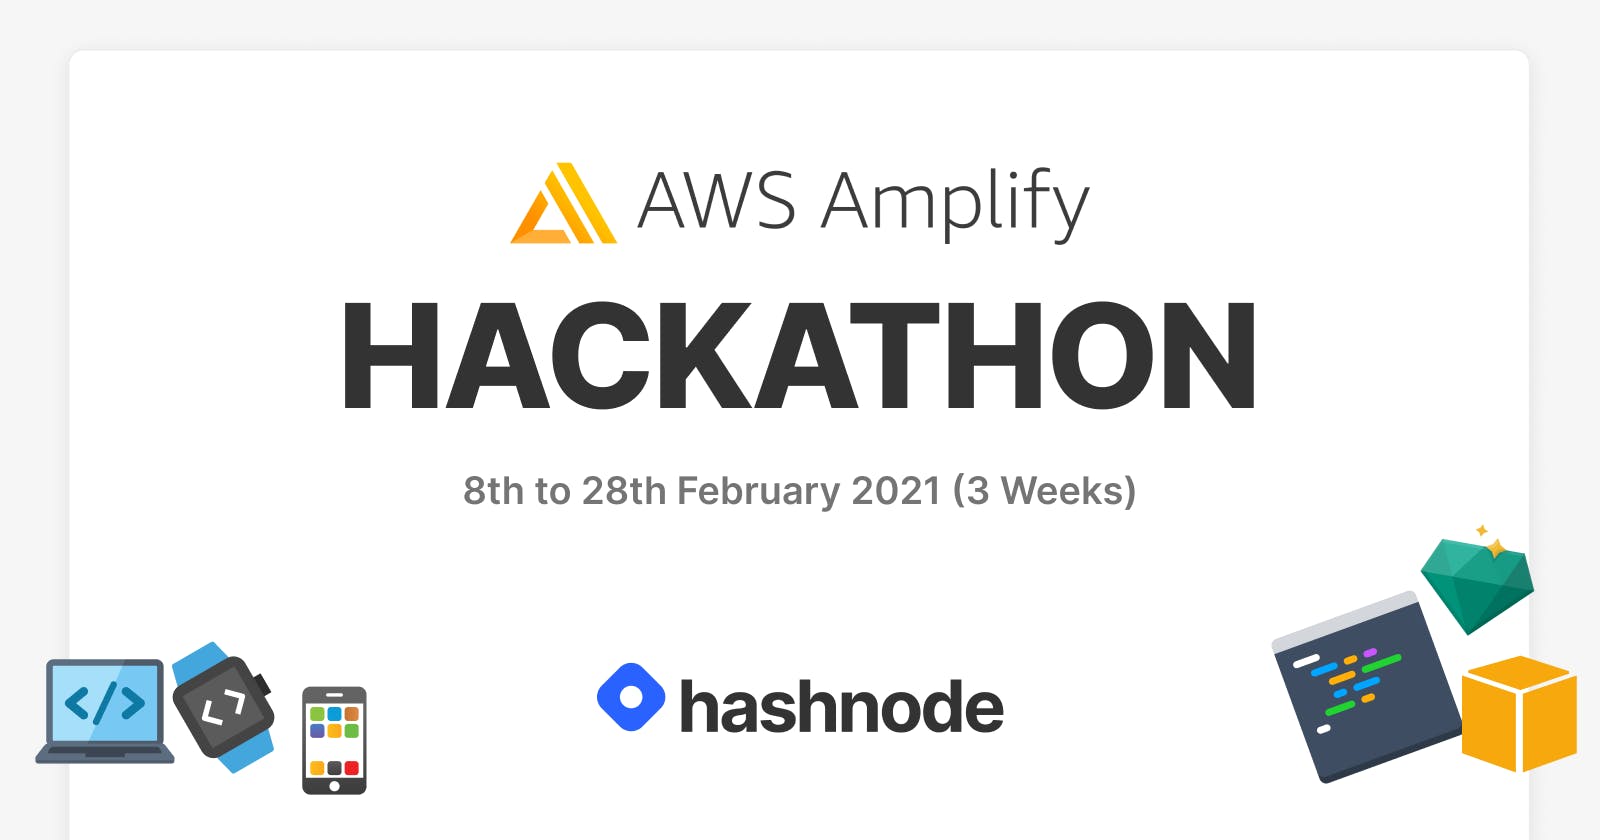 aws-amplify-nooutline.png